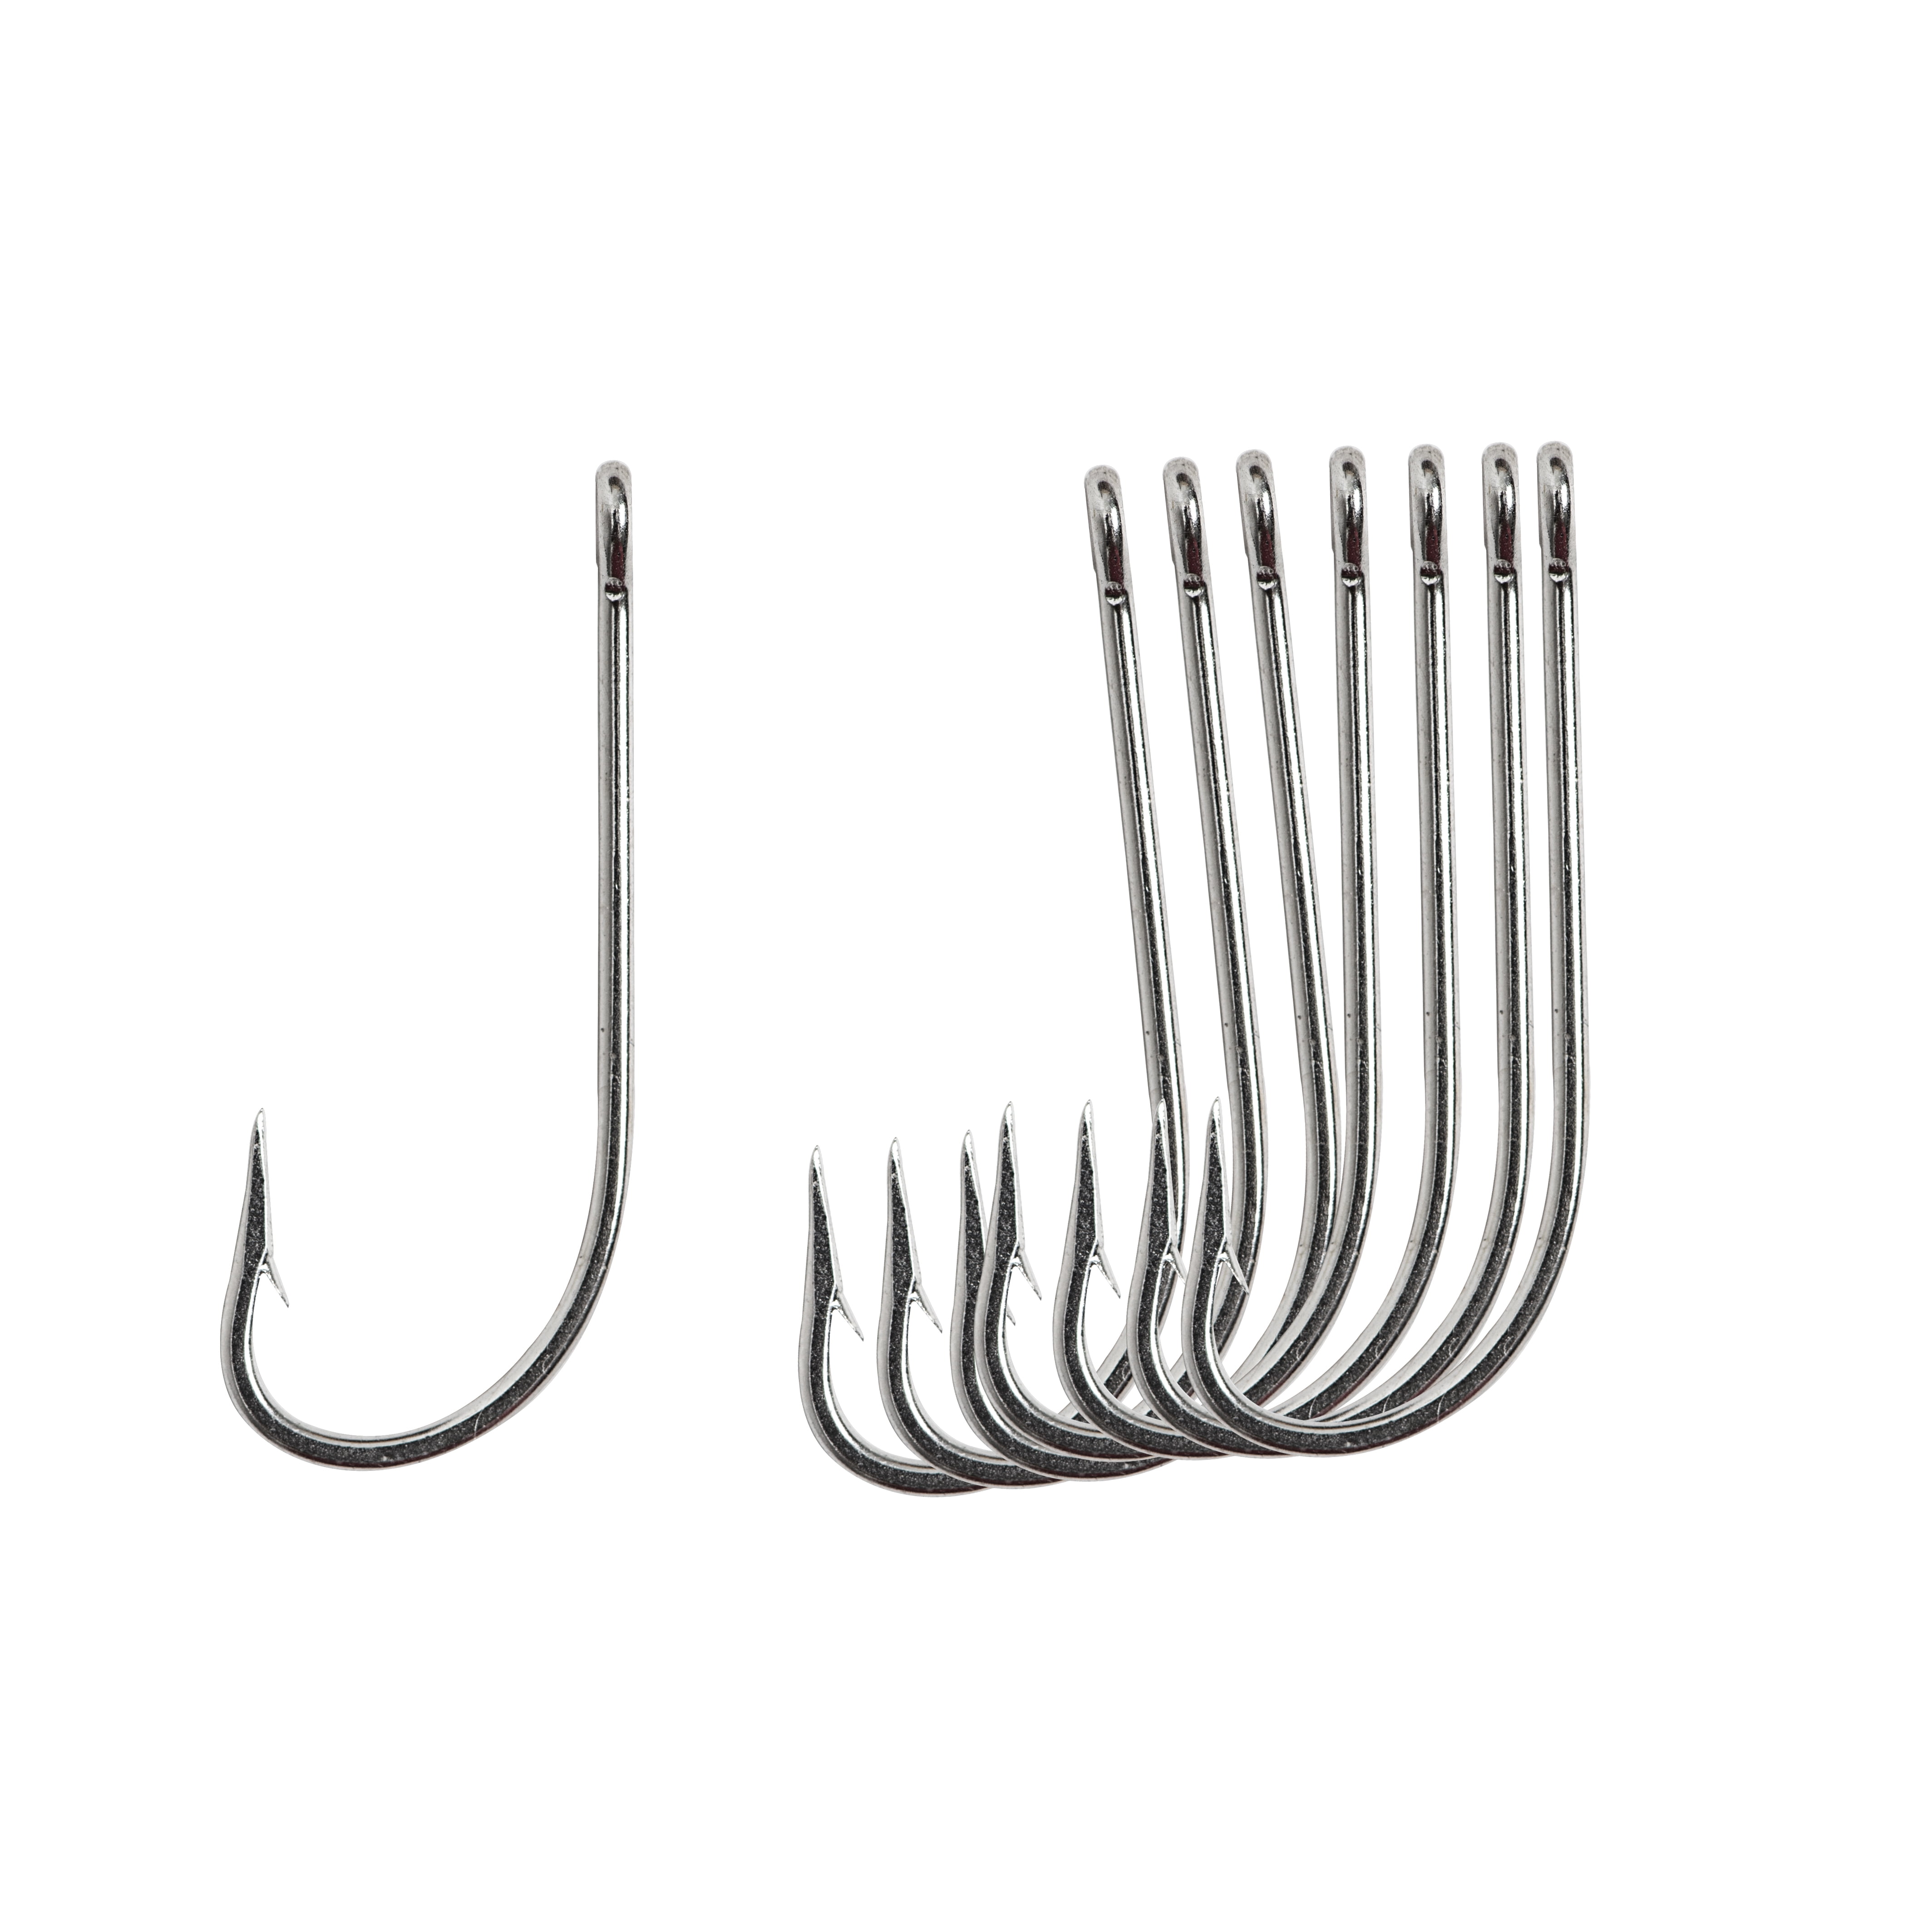 10 SIZE 7/0 O'SHAUGHNESSY FISHING HOOKS ULTRA SHARP SEA TACKLE CHEAPEST ON